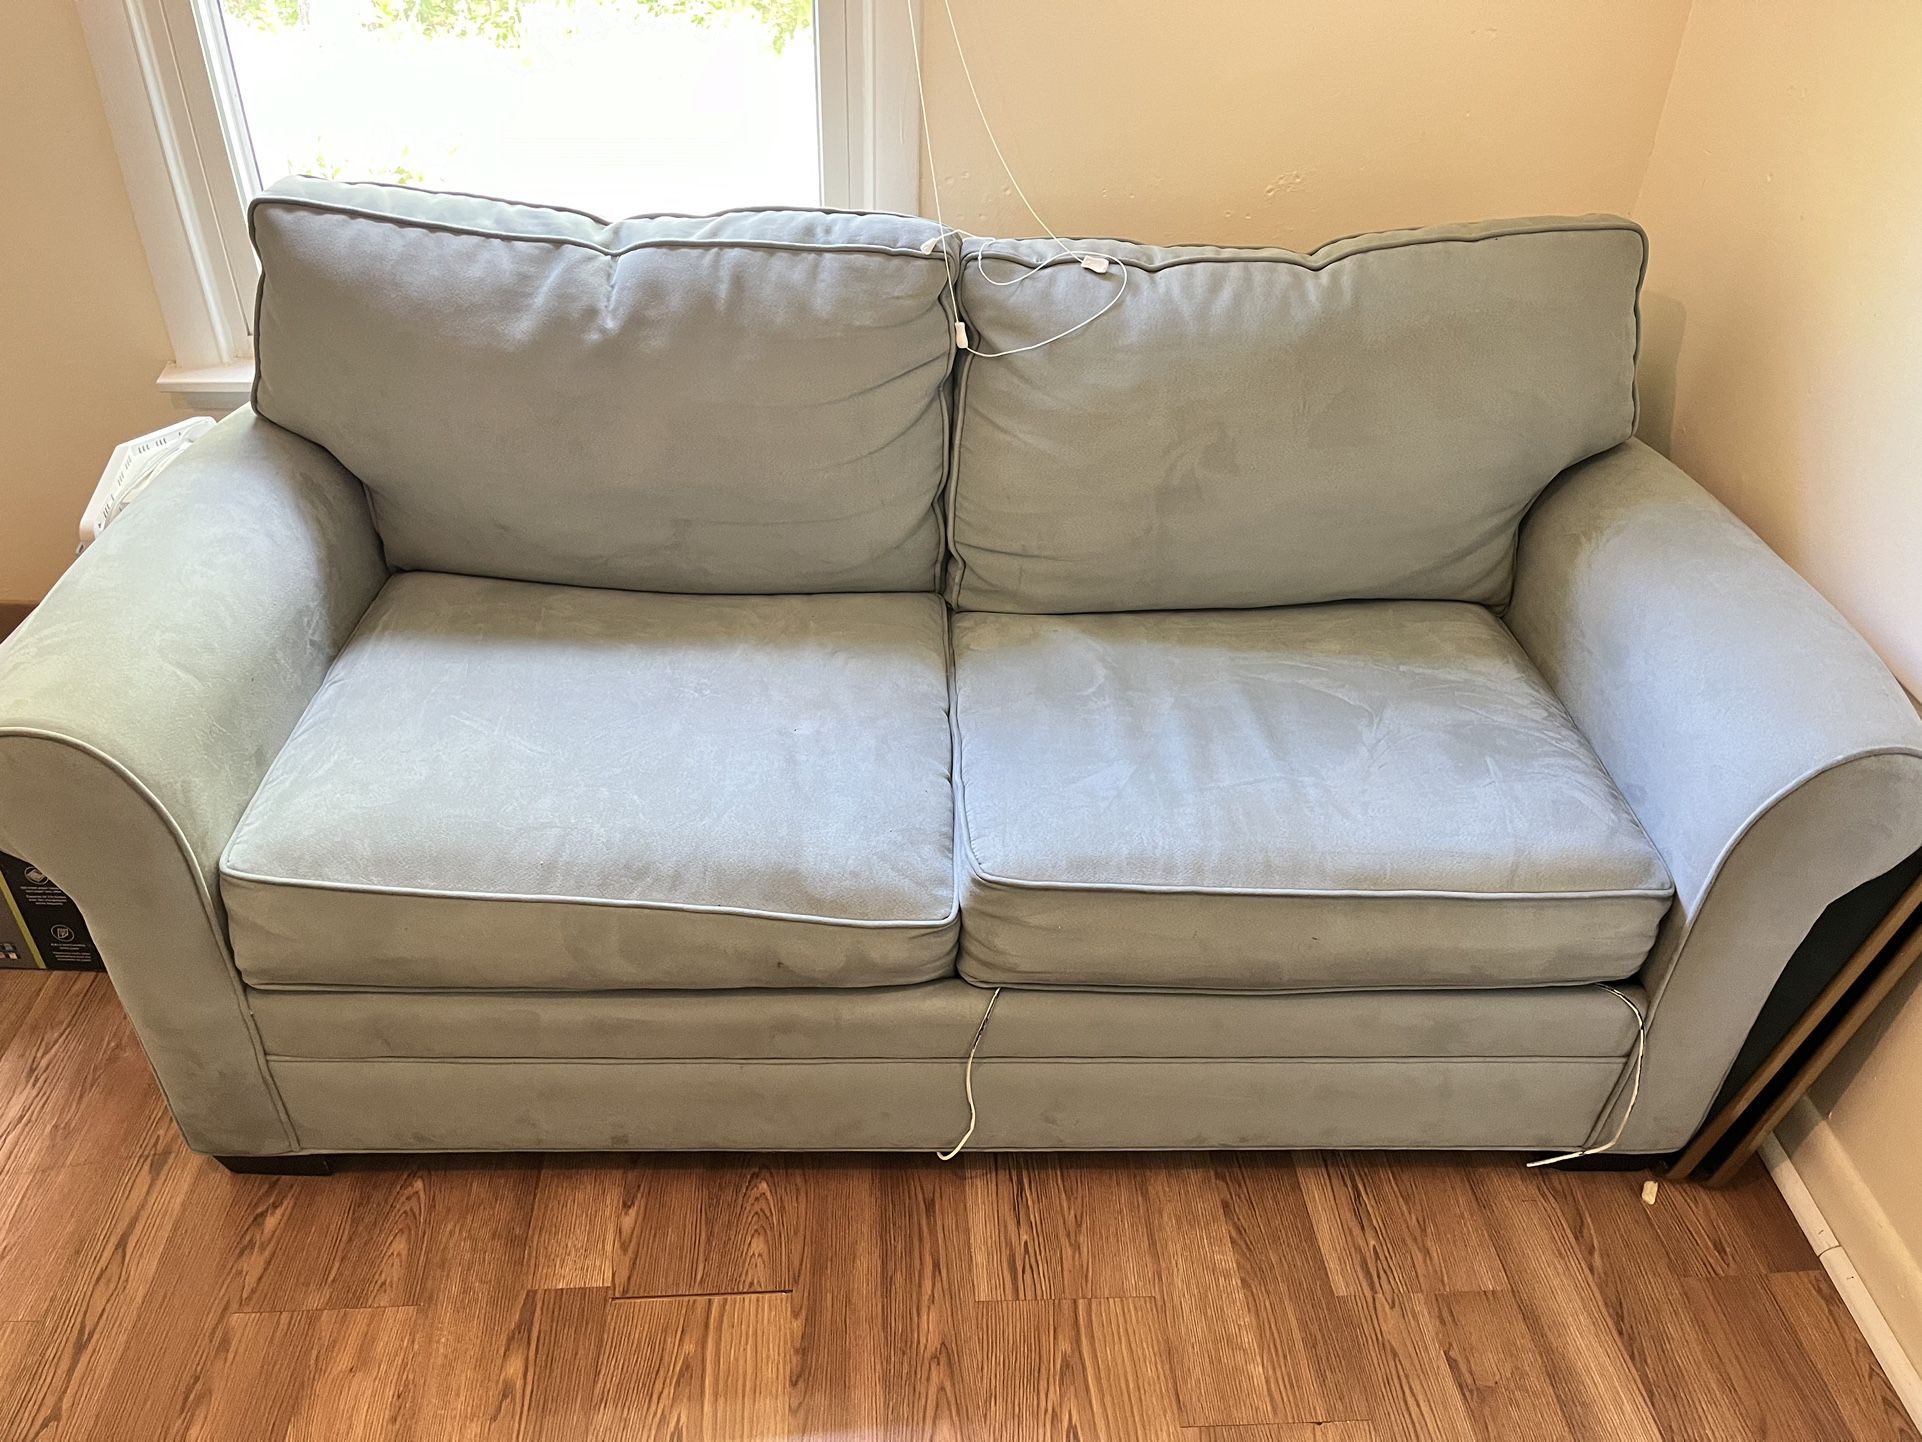 Loveseat Convertible to a Double Bed 